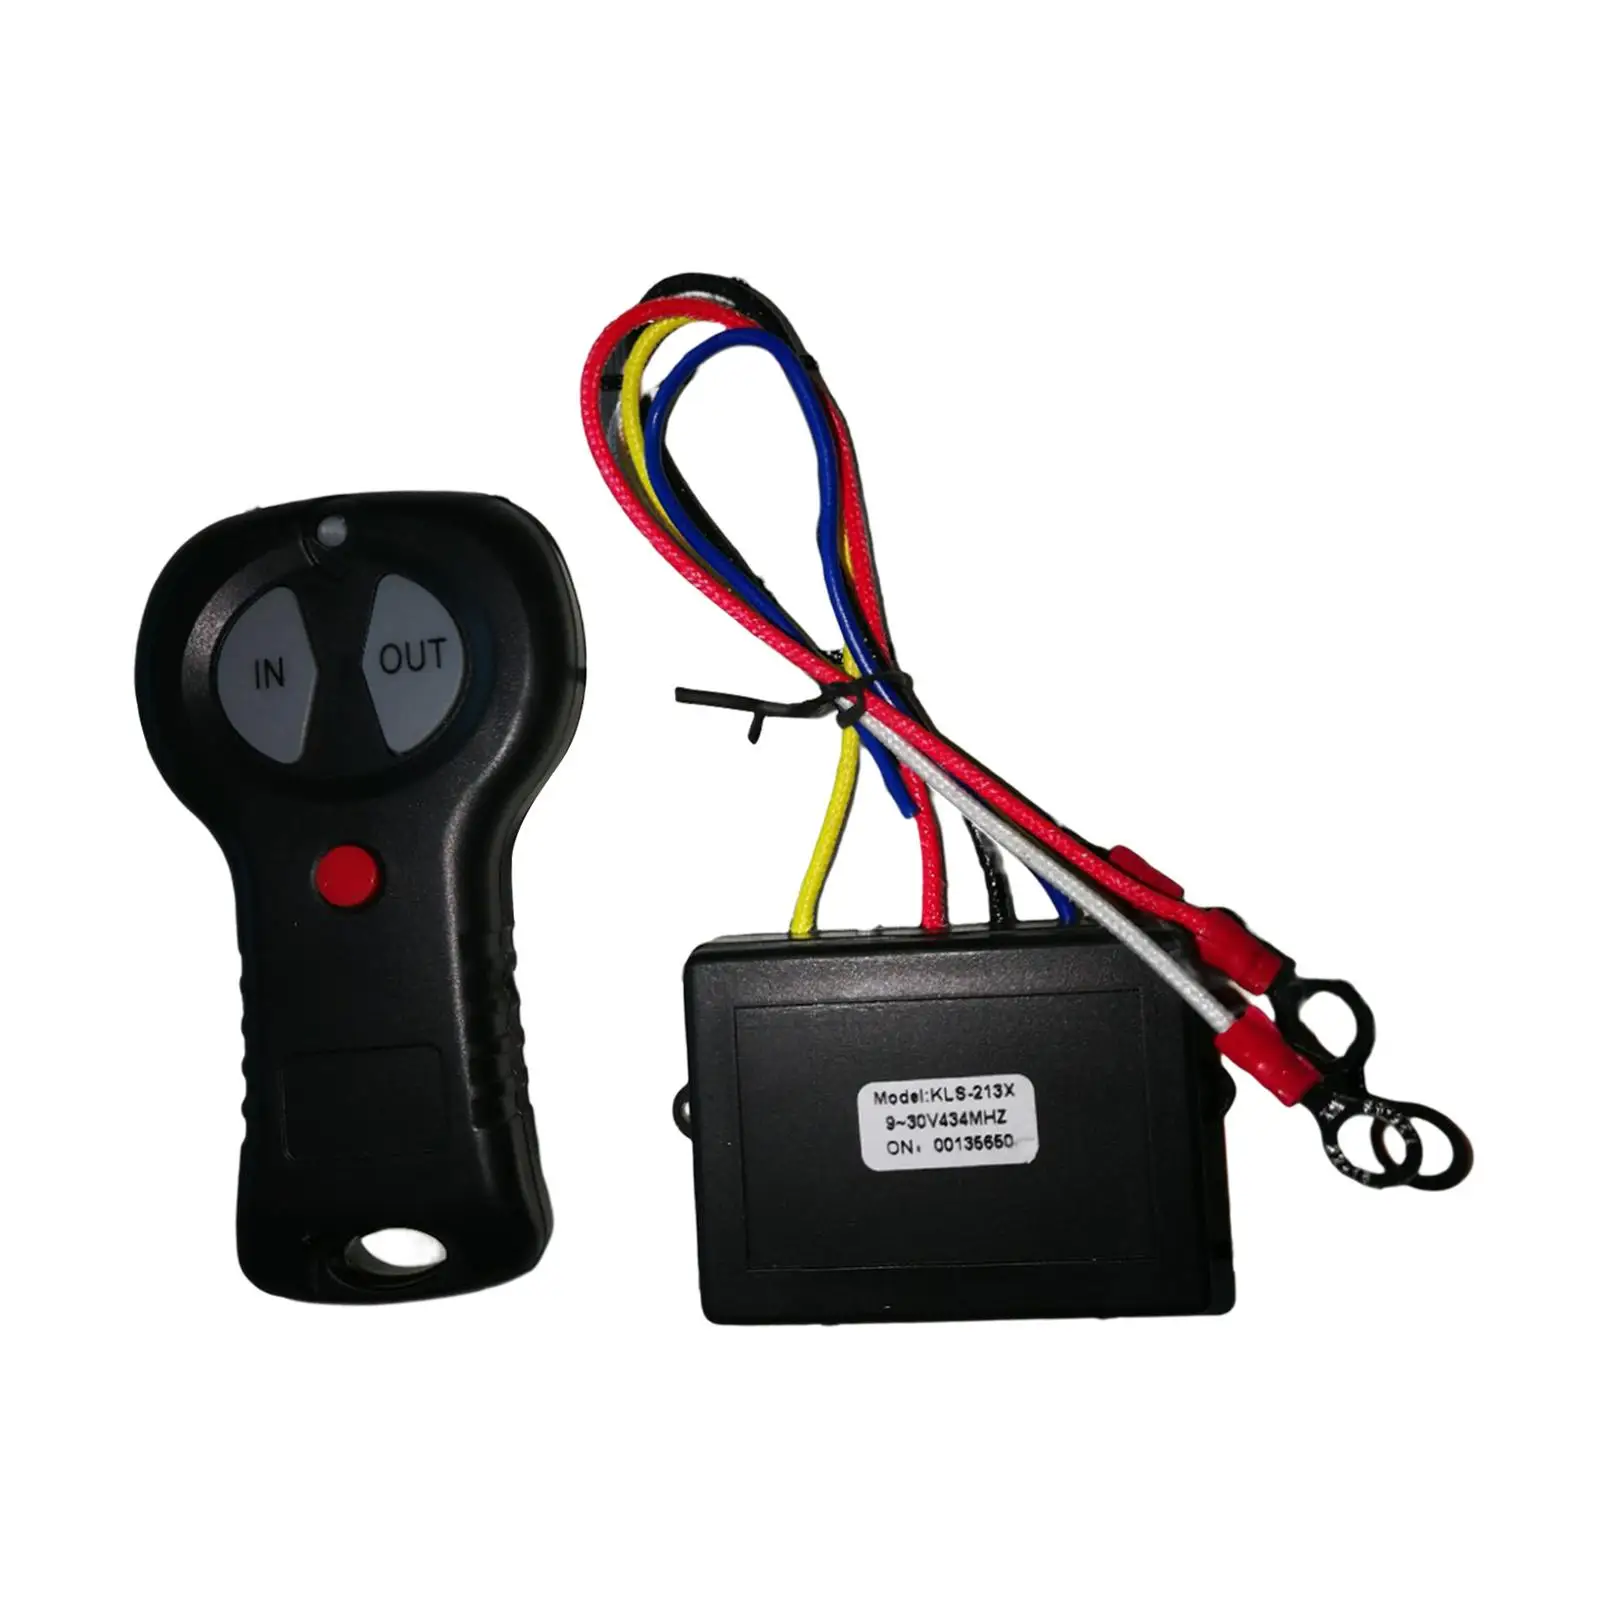 Winch Remote Control Universal with Indicator Light Waterproof for Auto